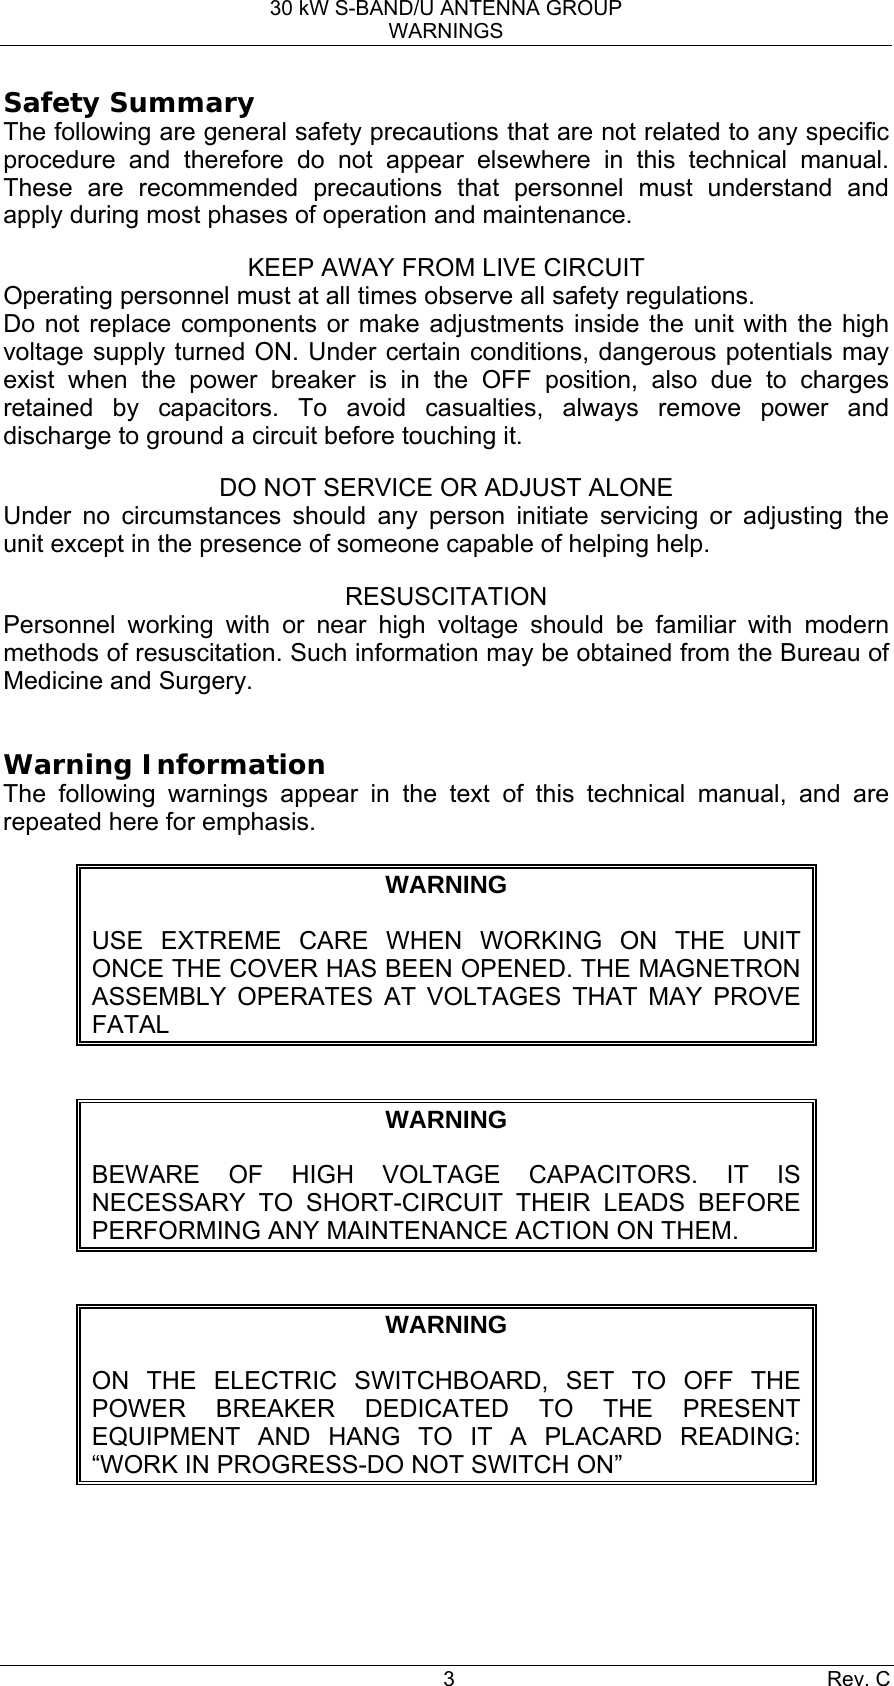 30 kW S-BAND/U ANTENNA GROUP WARNINGS 3 Rev. C Safety Summary The following are general safety precautions that are not related to any specific procedure and therefore do not appear elsewhere in this technical manual. These are recommended precautions that personnel must understand and apply during most phases of operation and maintenance. KEEP AWAY FROM LIVE CIRCUIT Operating personnel must at all times observe all safety regulations. Do not replace components or make adjustments inside the unit with the high voltage supply turned ON. Under certain conditions, dangerous potentials may exist when the power breaker is in the OFF position, also due to charges retained by capacitors. To avoid casualties, always remove power and discharge to ground a circuit before touching it. DO NOT SERVICE OR ADJUST ALONE Under no circumstances should any person initiate servicing or adjusting the unit except in the presence of someone capable of helping help. RESUSCITATION Personnel working with or near high voltage should be familiar with modern methods of resuscitation. Such information may be obtained from the Bureau of Medicine and Surgery.  Warning Information The following warnings appear in the text of this technical manual, and are repeated here for emphasis.  WARNING  USE EXTREME CARE WHEN WORKING ON THE UNIT ONCE THE COVER HAS BEEN OPENED. THE MAGNETRON ASSEMBLY OPERATES AT VOLTAGES THAT MAY PROVE FATAL  WARNING  BEWARE OF HIGH VOLTAGE CAPACITORS. IT IS NECESSARY TO SHORT-CIRCUIT THEIR LEADS BEFORE PERFORMING ANY MAINTENANCE ACTION ON THEM.  WARNING  ON THE ELECTRIC SWITCHBOARD, SET TO OFF THE POWER BREAKER DEDICATED TO THE PRESENT EQUIPMENT AND HANG TO IT A PLACARD READING: “WORK IN PROGRESS-DO NOT SWITCH ON”   